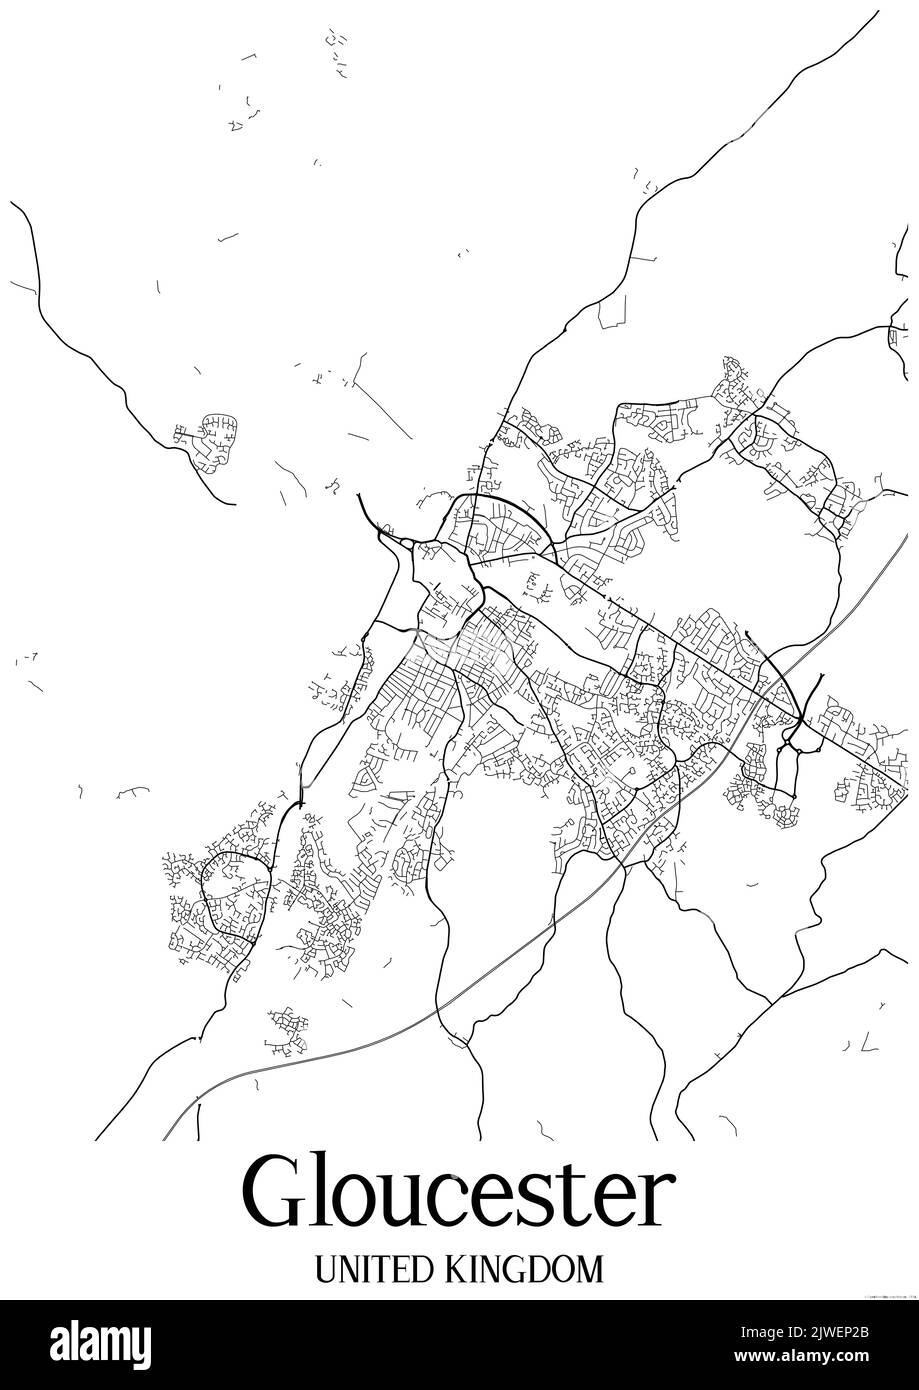 Black and white classic urban map of Gloucester United Kingdom.This map contains geographic lines for main and secondary roads. Stock Photo